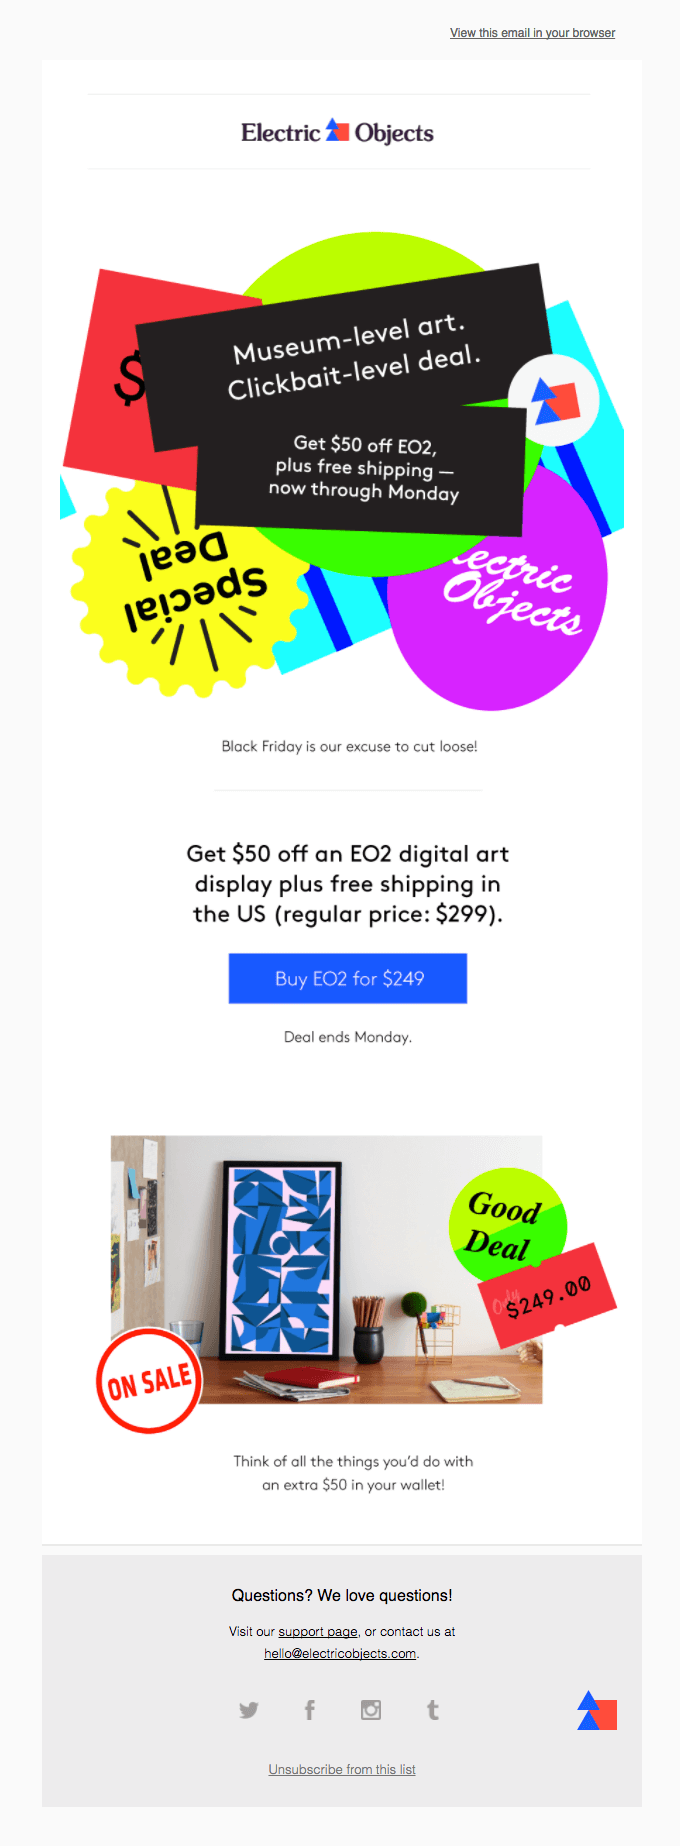 A Black Friday email with colorful elements and the main information stated on top on a black background